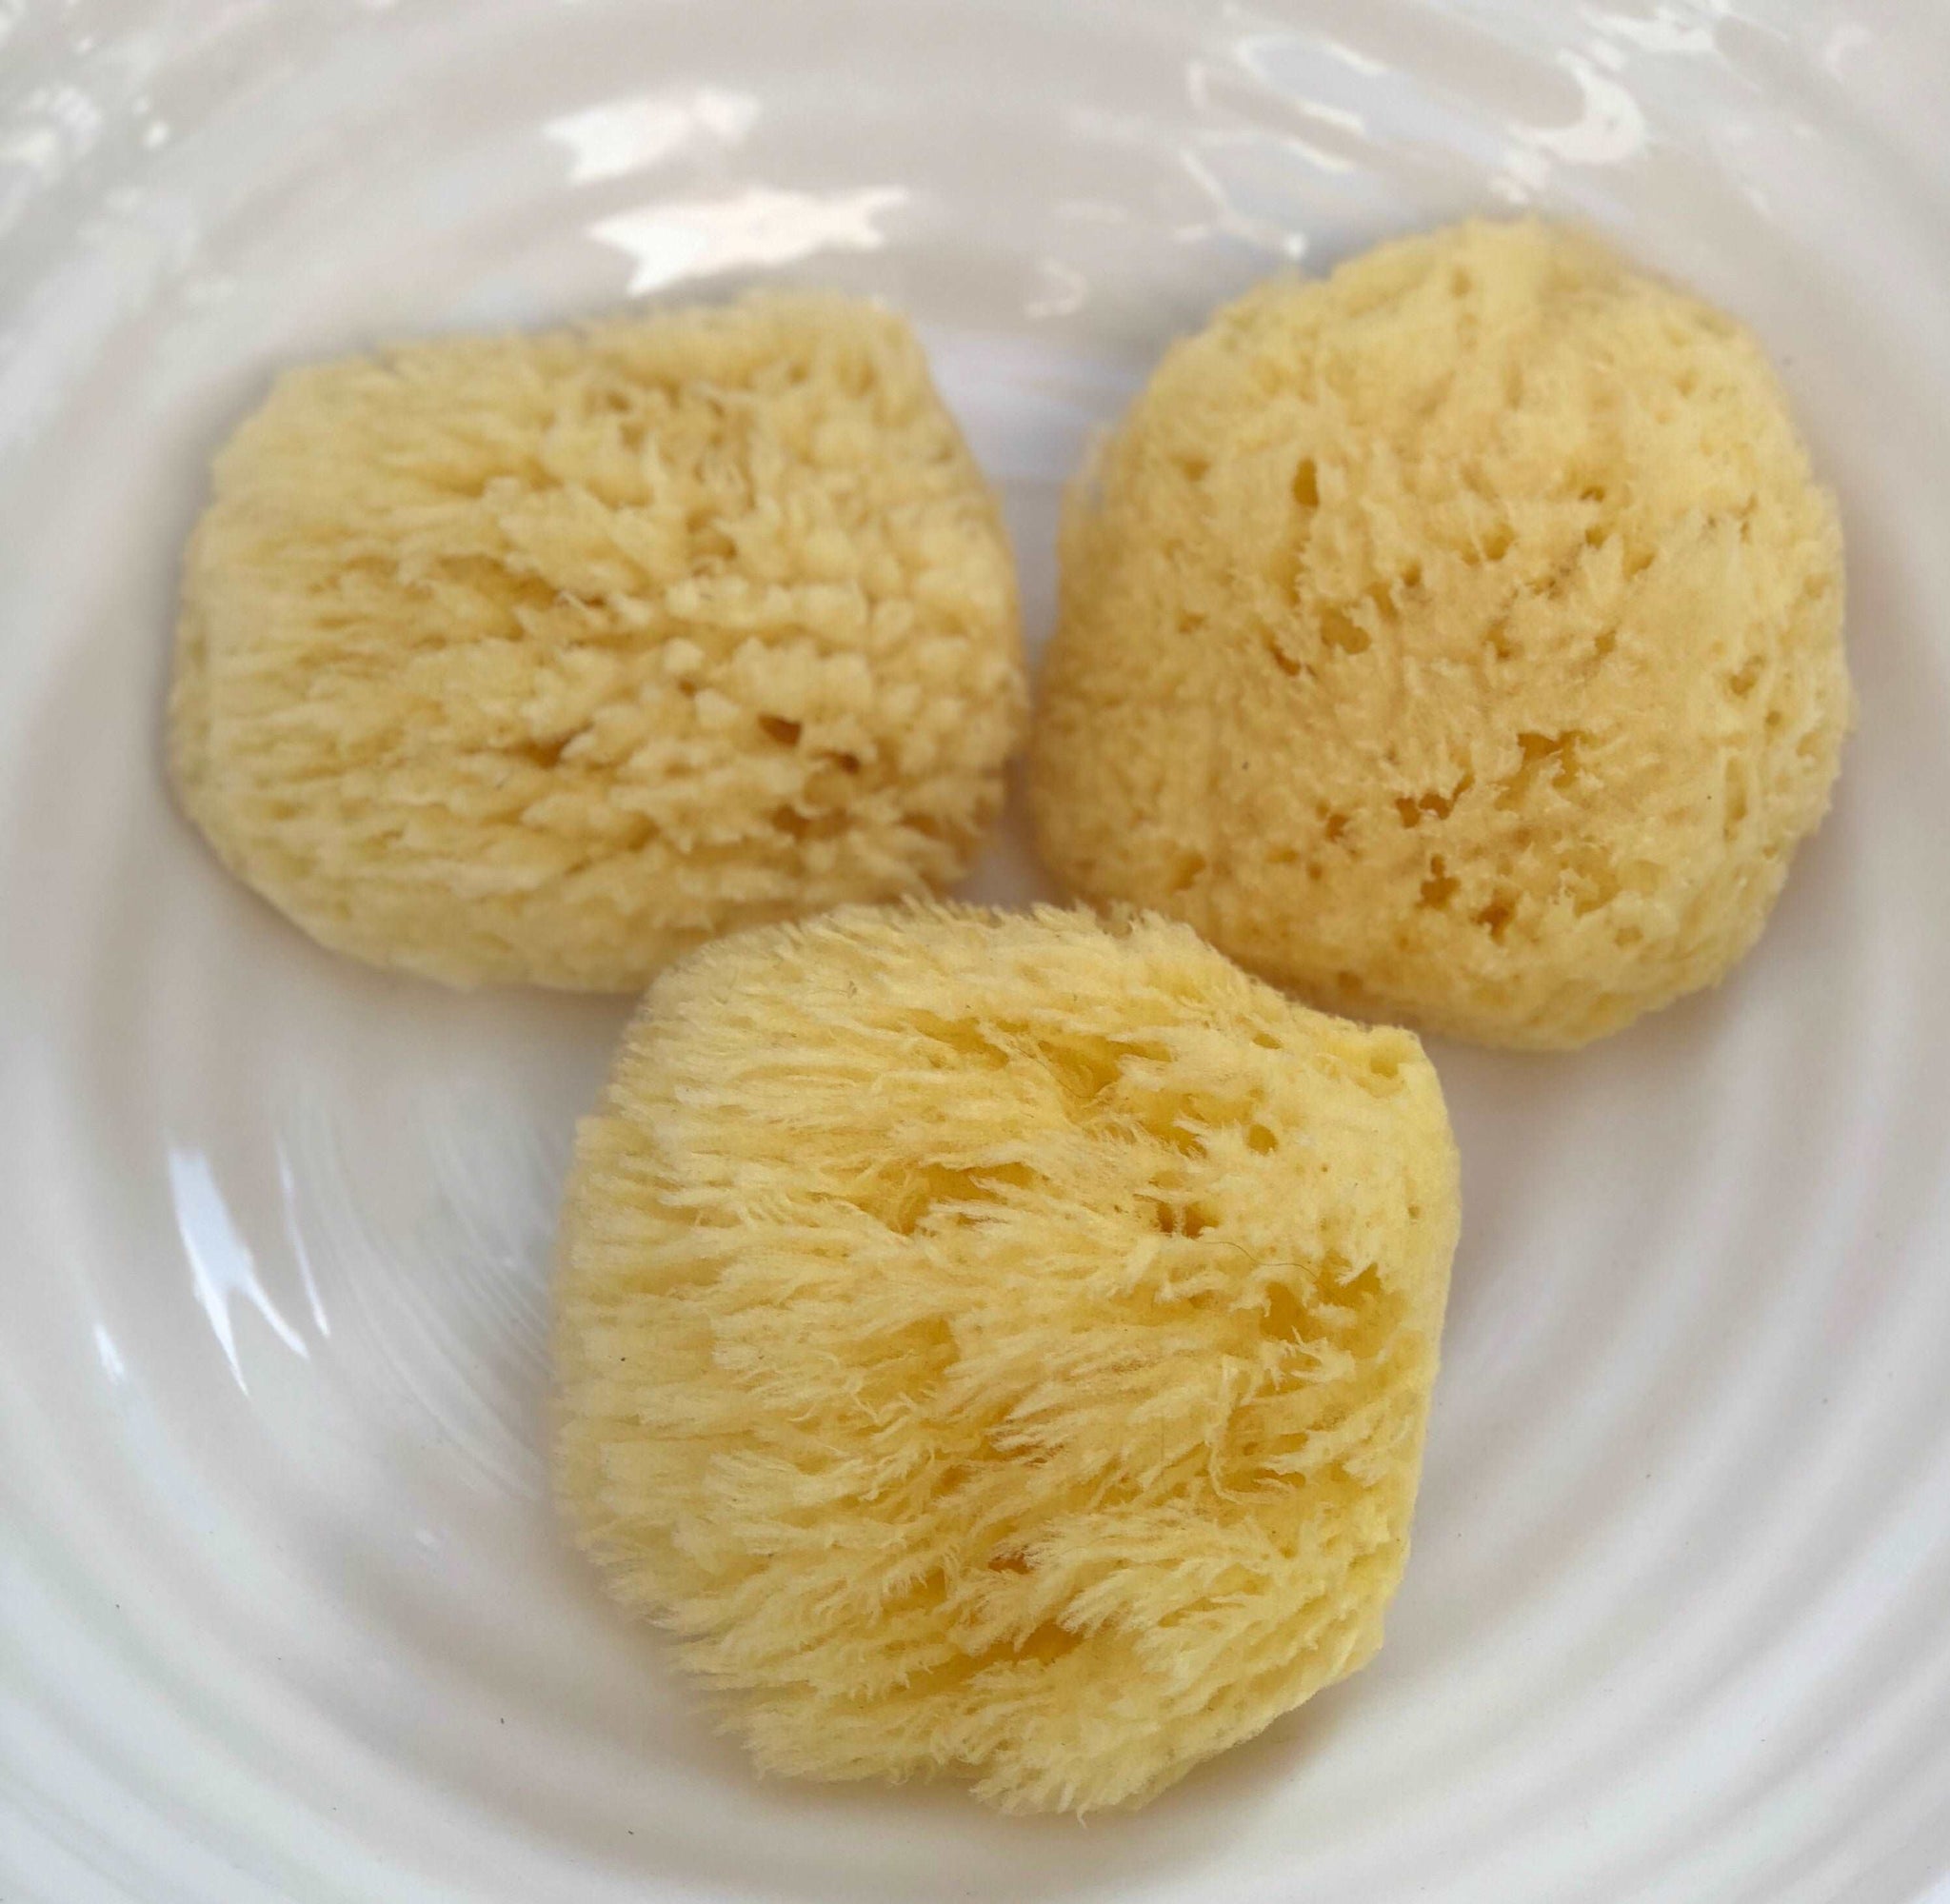 Our Dead Sea Bath Sponges have a gentle, soft texture and can be used for both facial and body applications in the bath or shower.